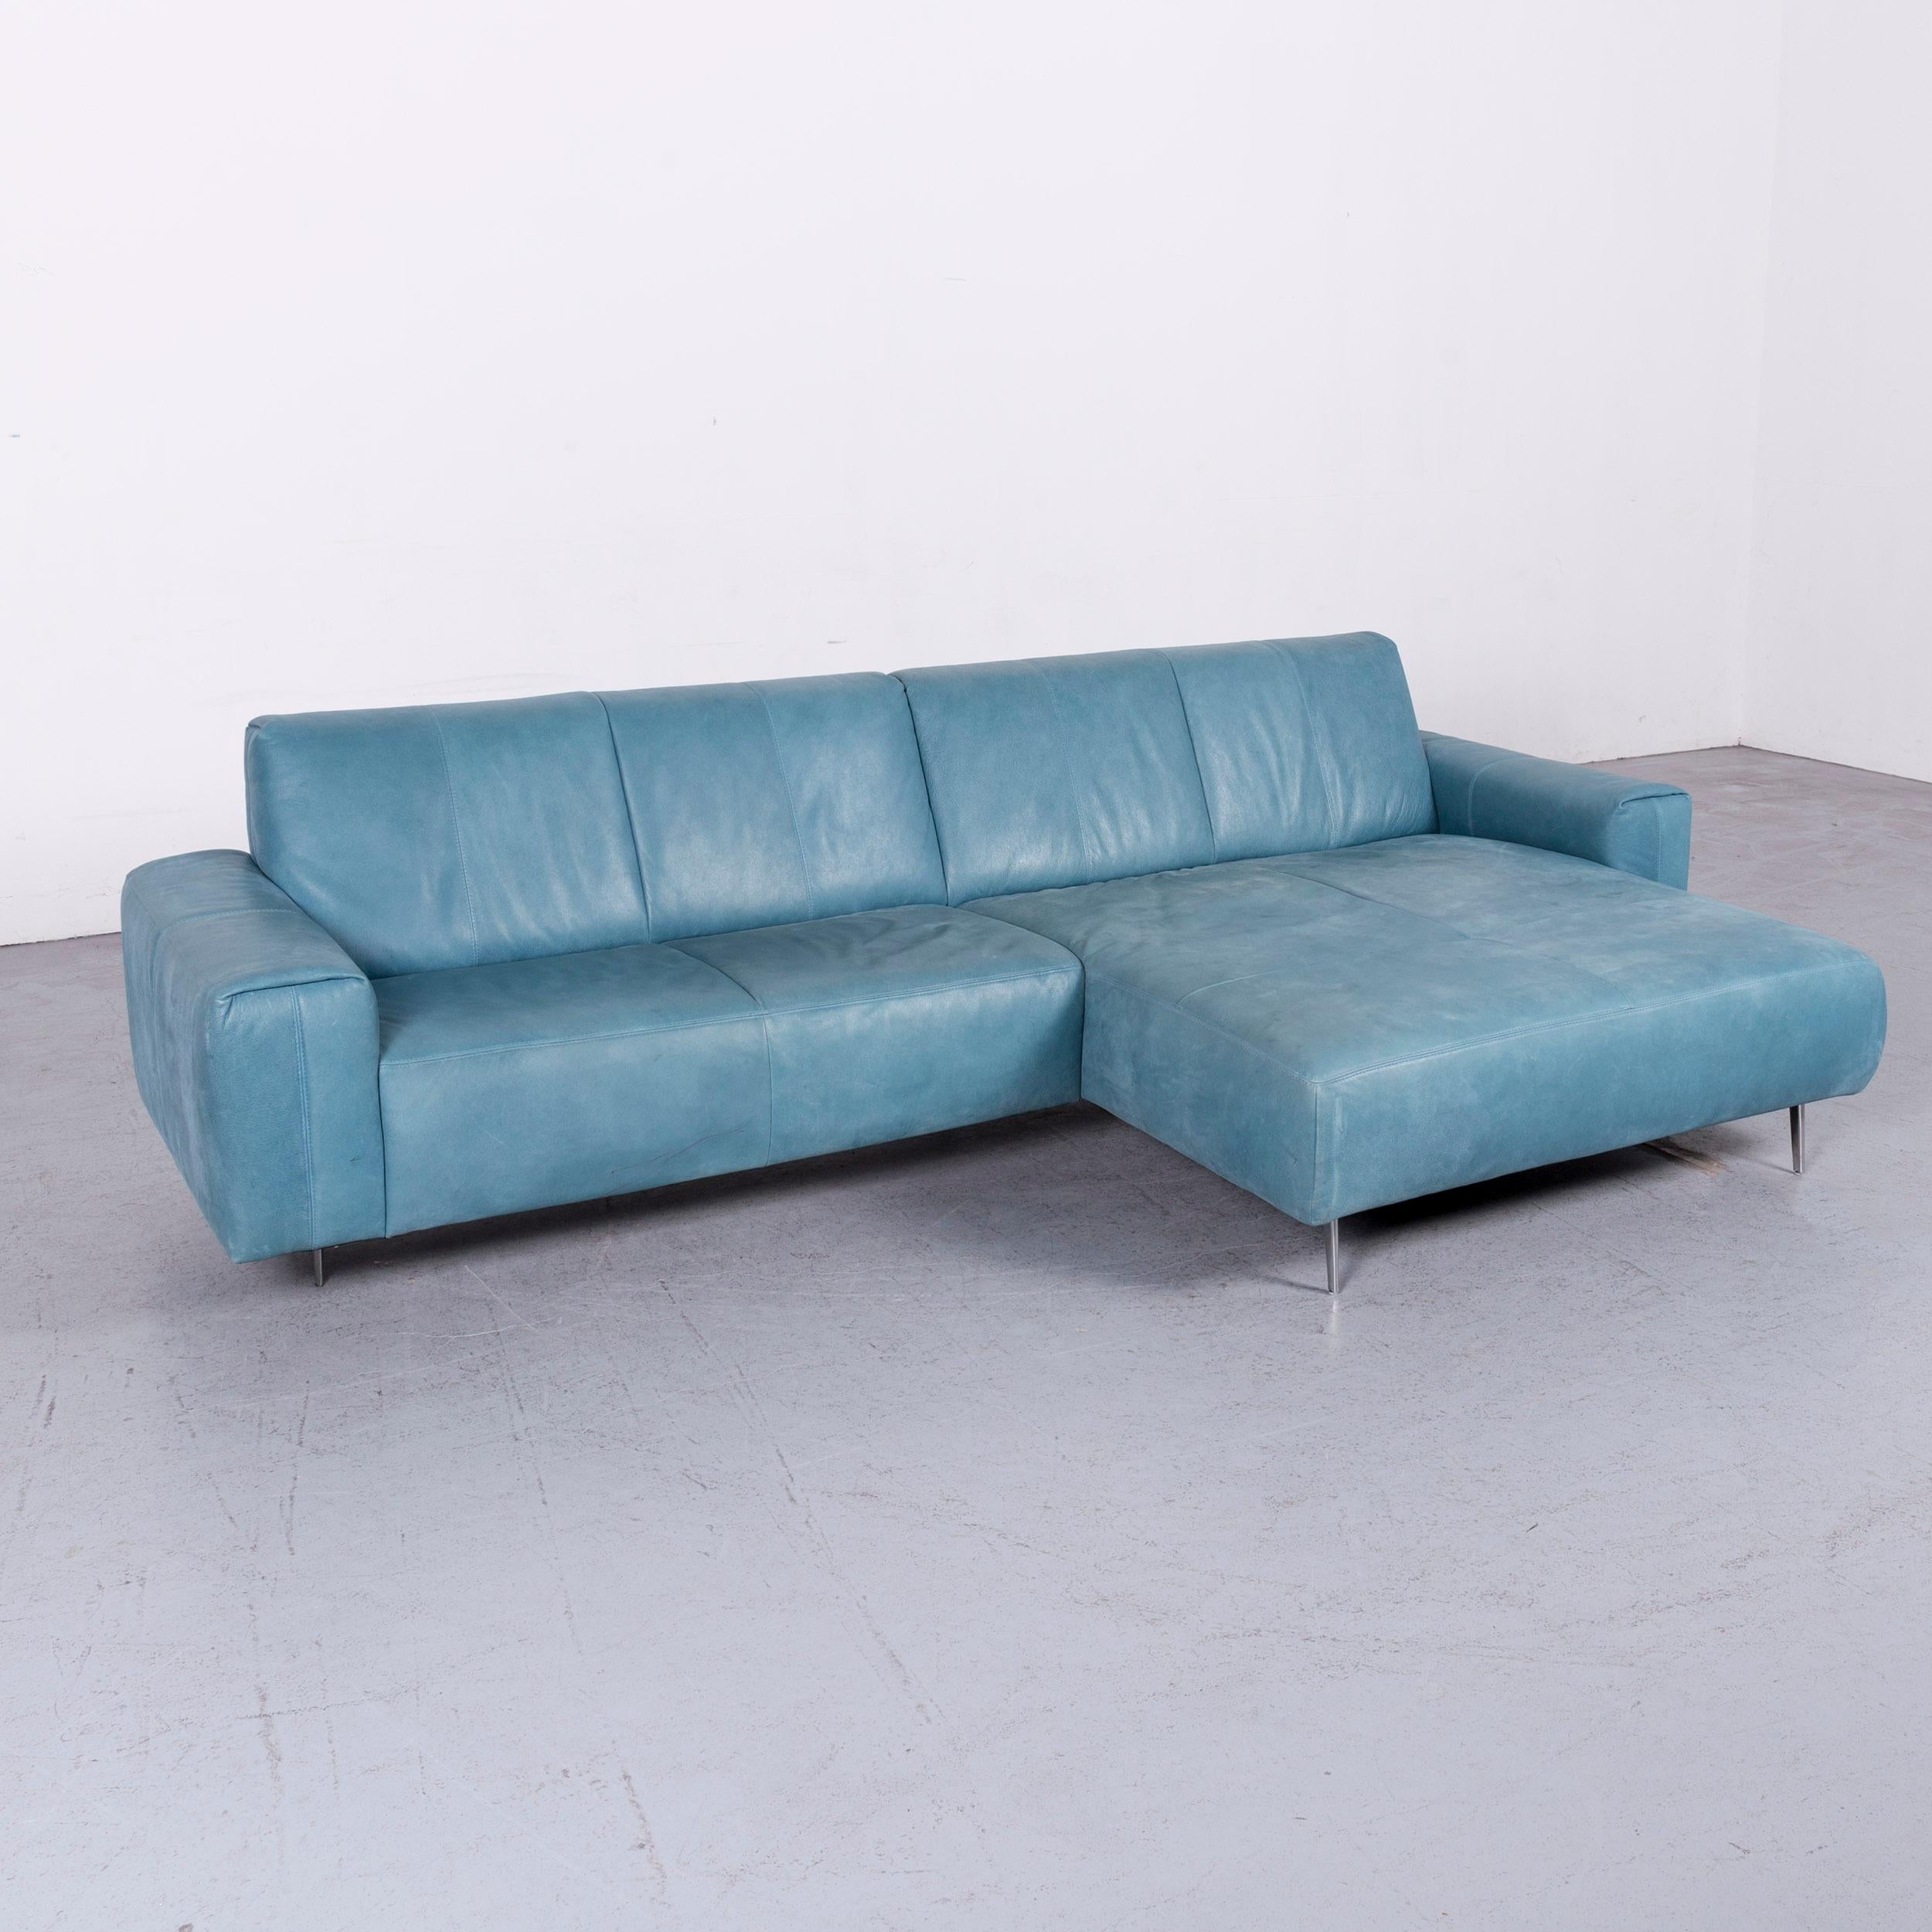 We bring to you a Koinor Garret designer leather sofa in bleu corner, sofa couch.